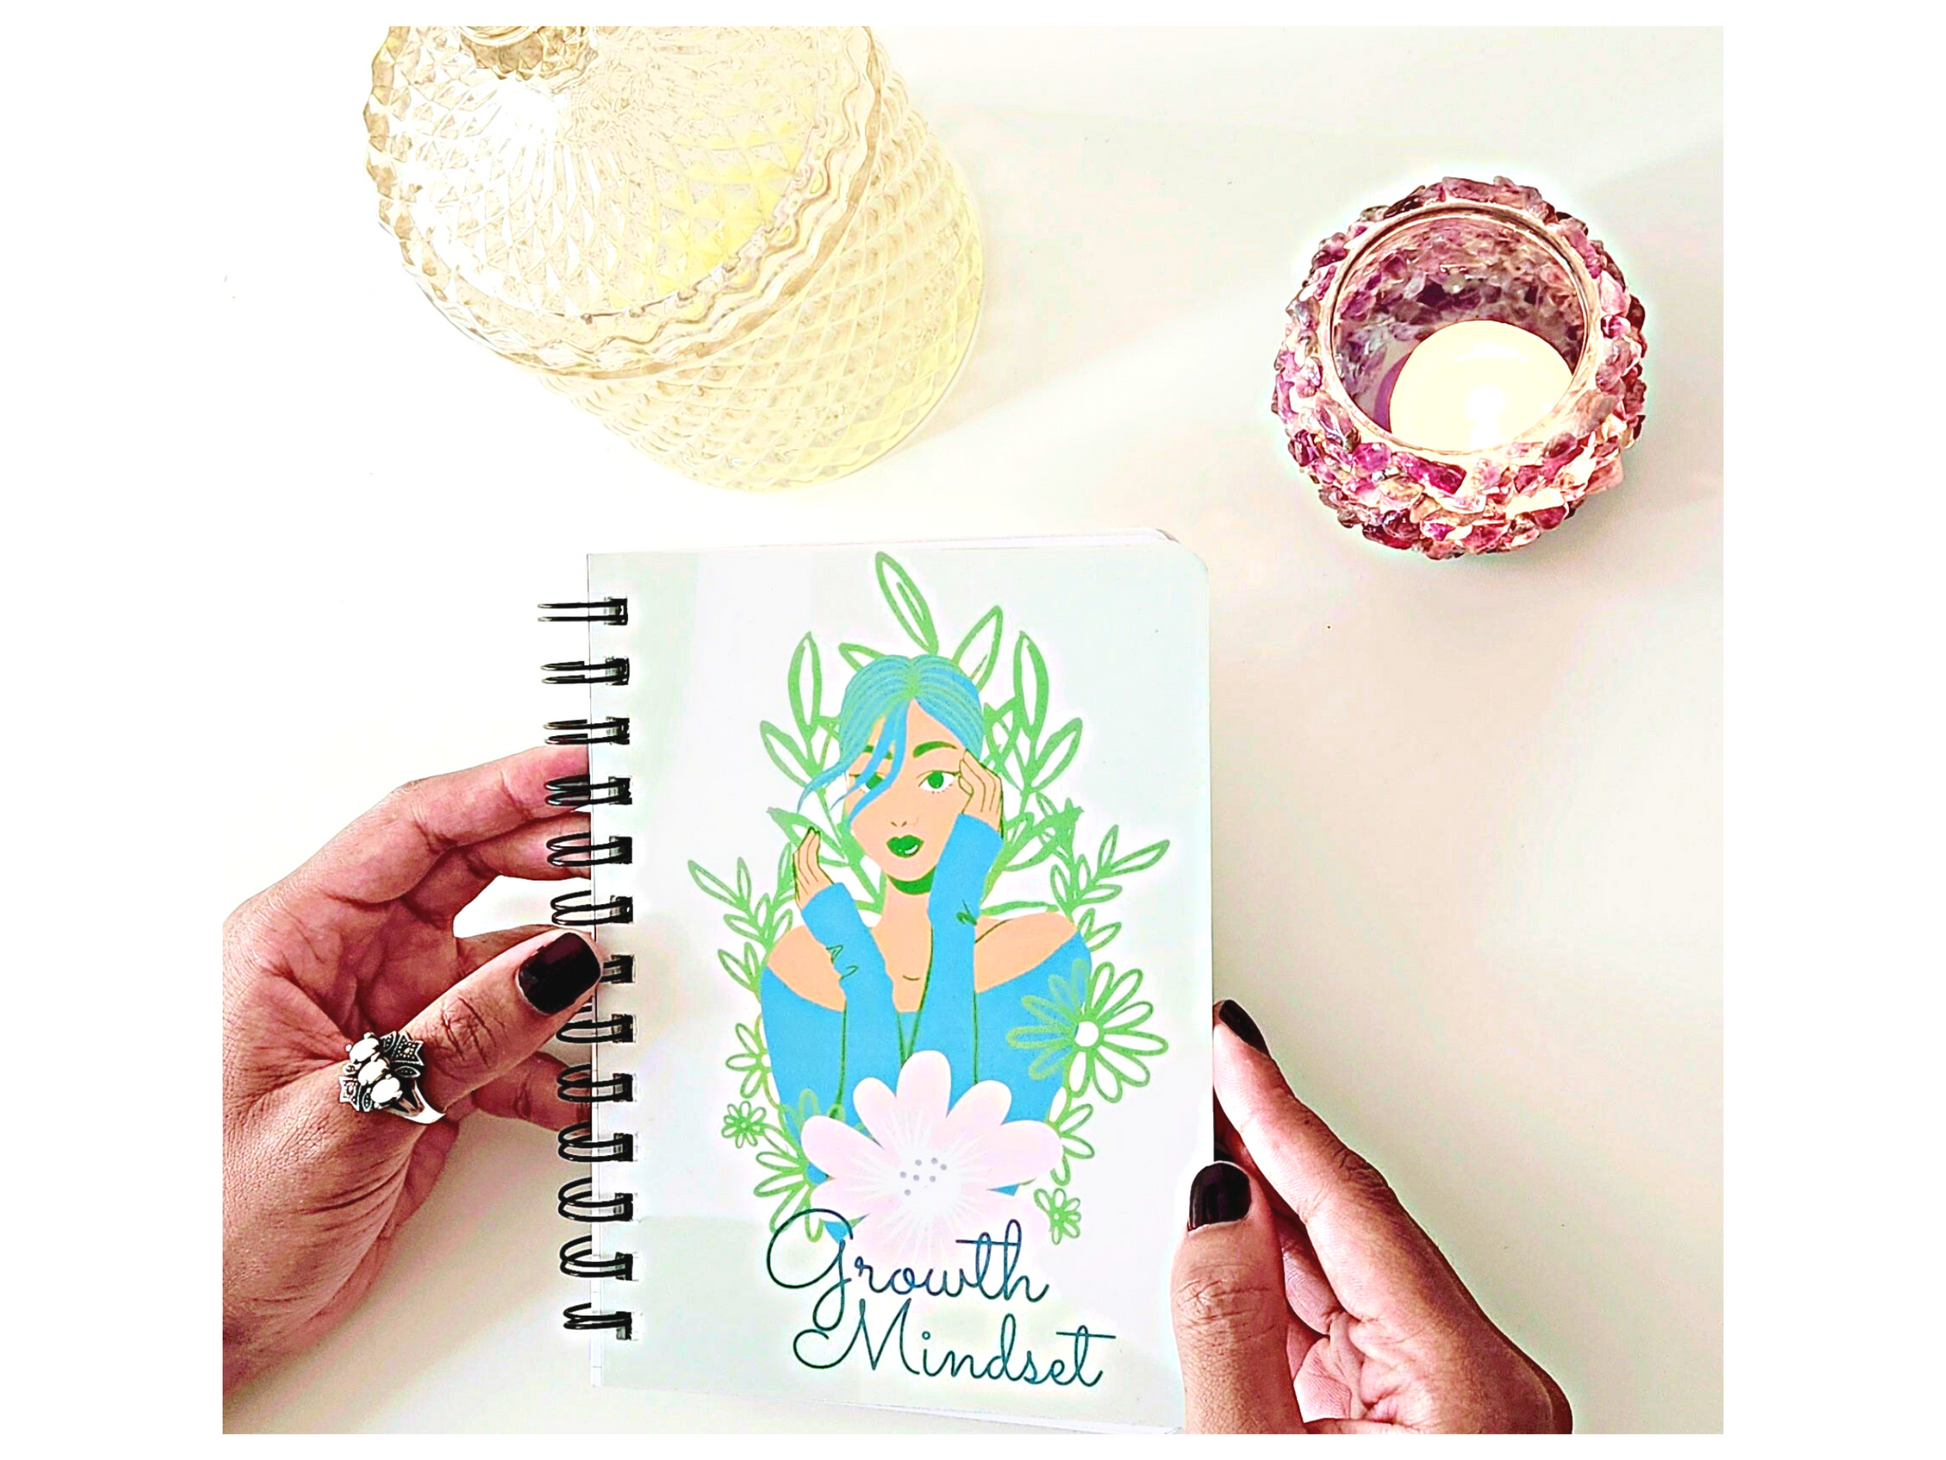 A person holding a "Growth Mindset" Inspirational Journal for Success and Self Improvement with a reflective drawing of a woman holding a flower.